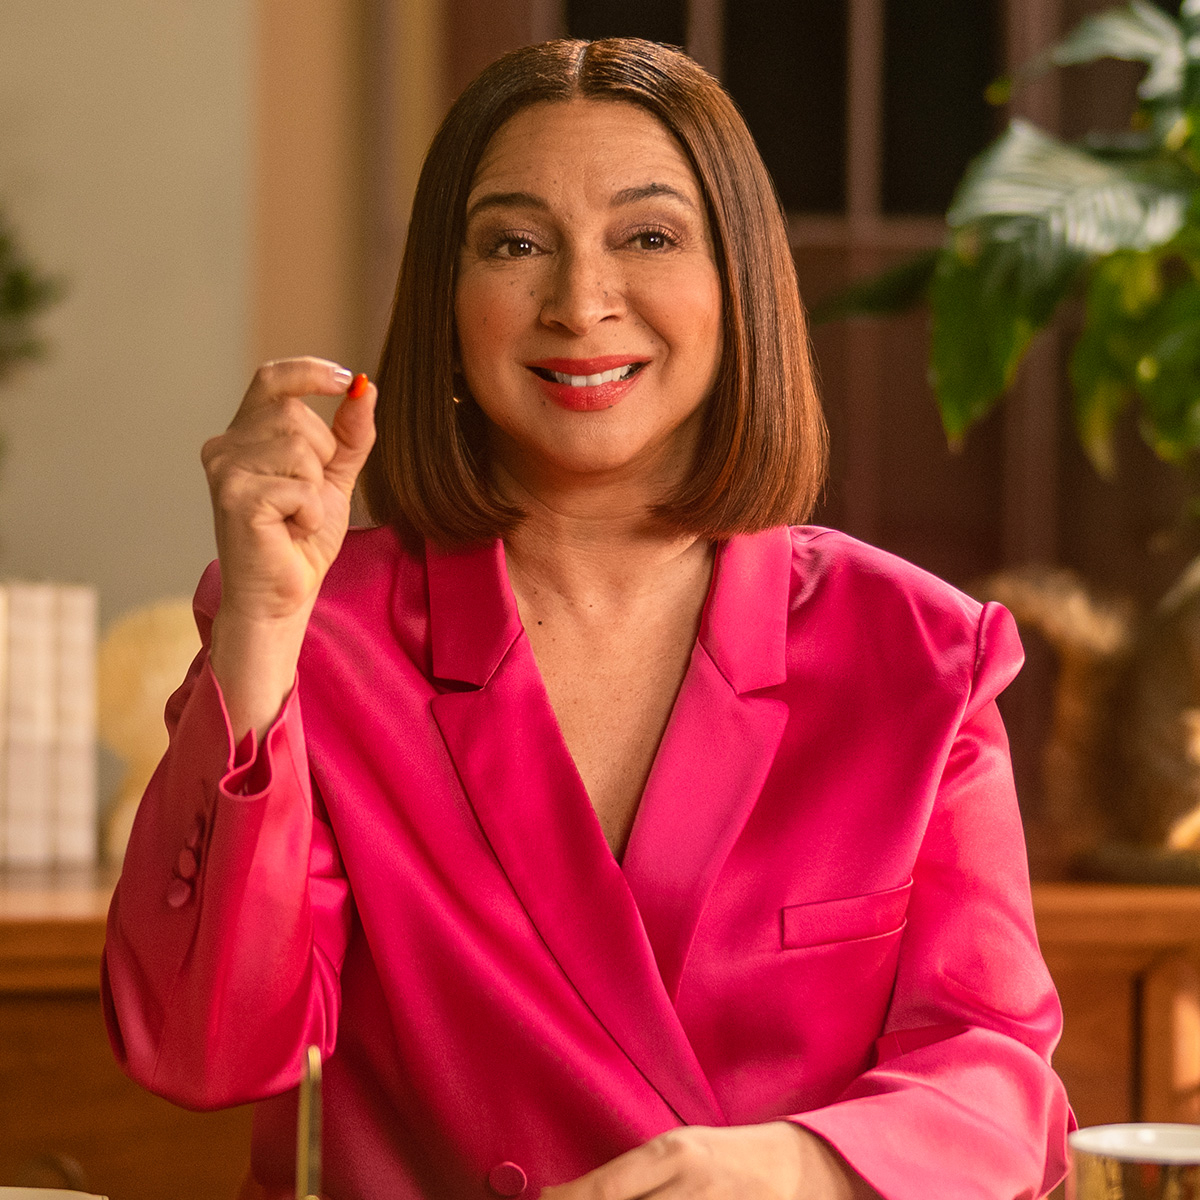 Maya Rudolph is the new face of M&M'S. Polarizing spokescandies